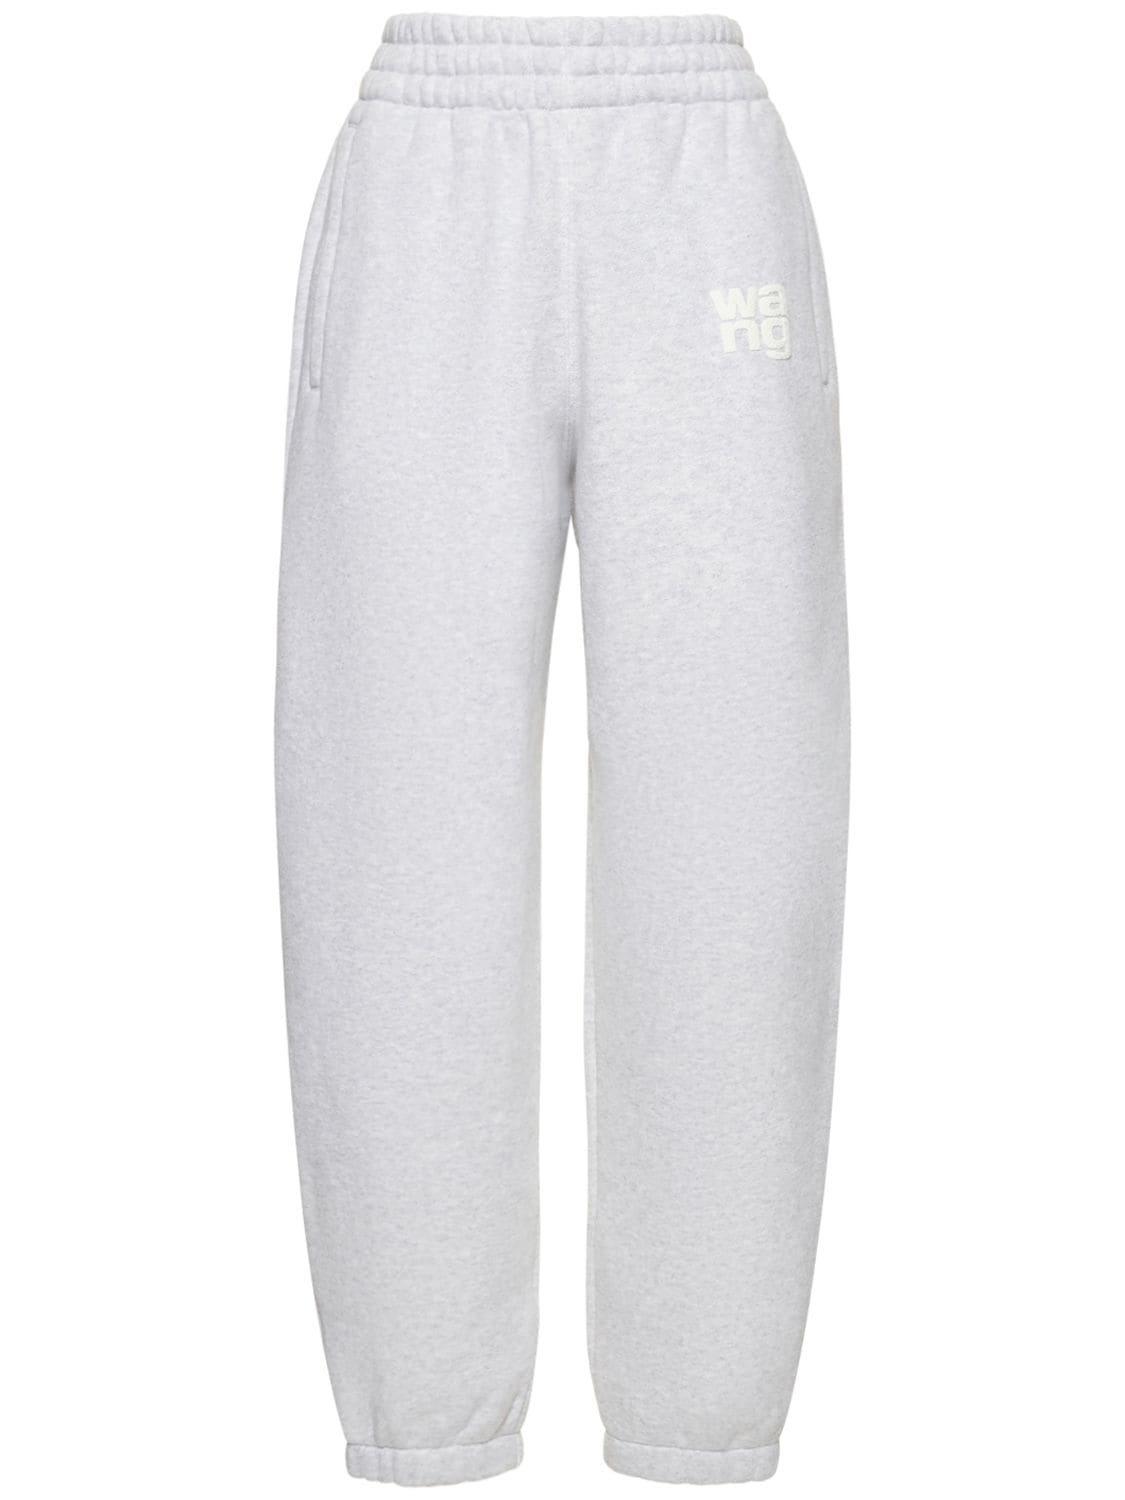 Image of Essential Cotton Terry Sweatpants